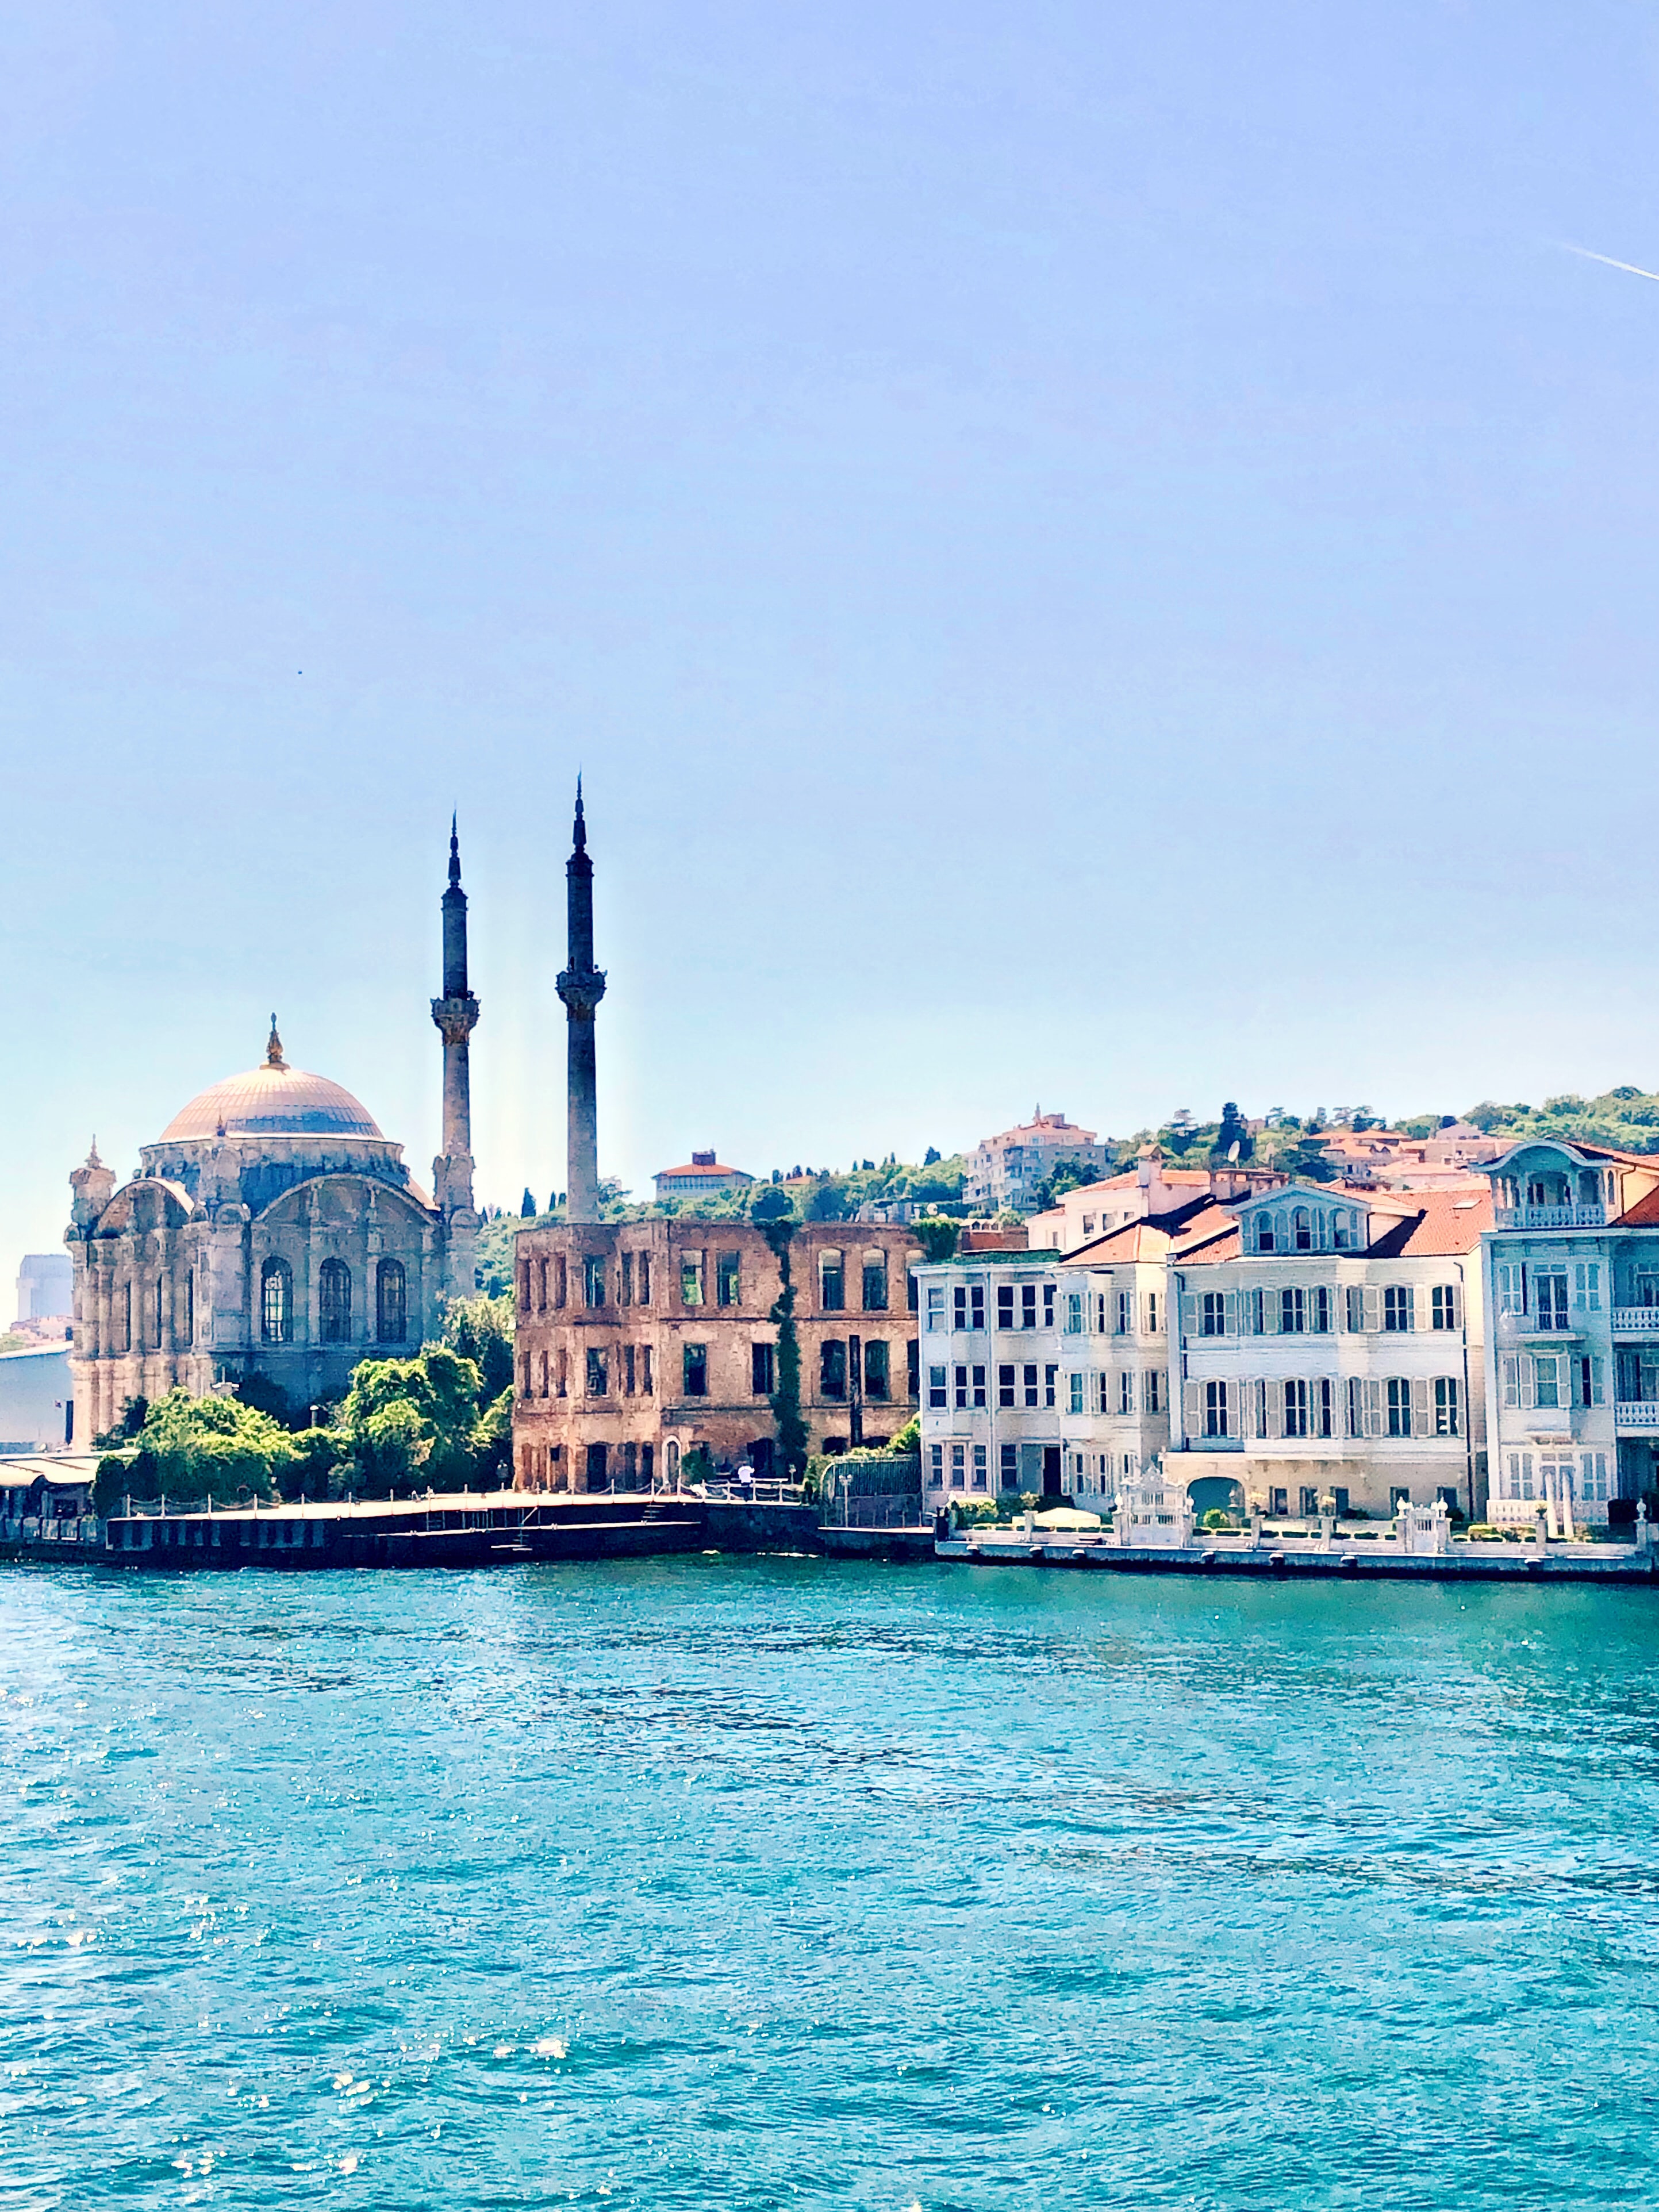 image of Istanbul